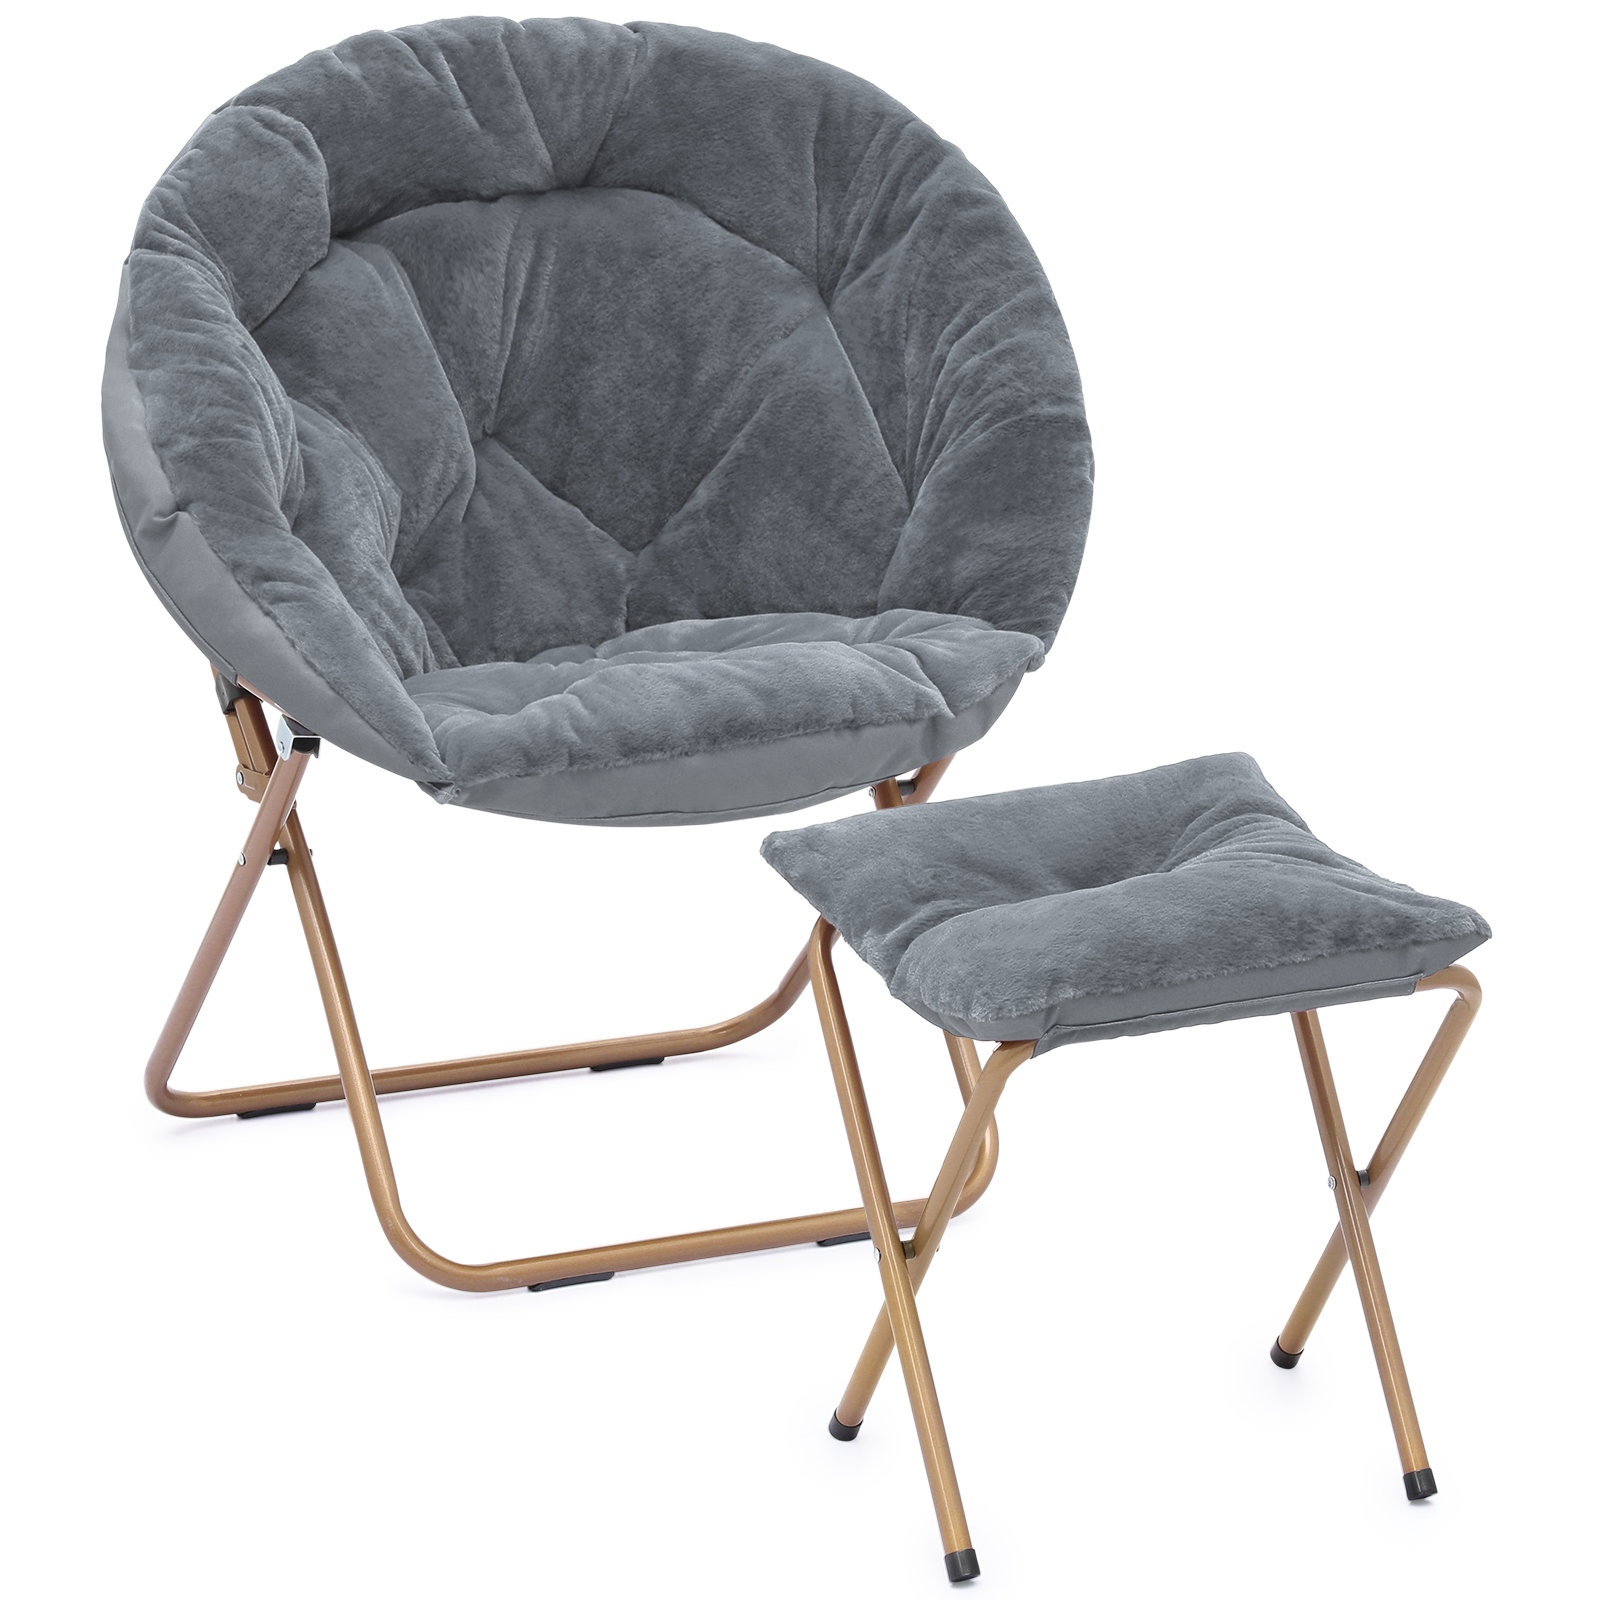 Marqueen Folding Saucer Chairs with Ottoman, Portable Moon Chair Accent Chair with Footrest Mercer41 Fabric: Gray Synthetic Fur